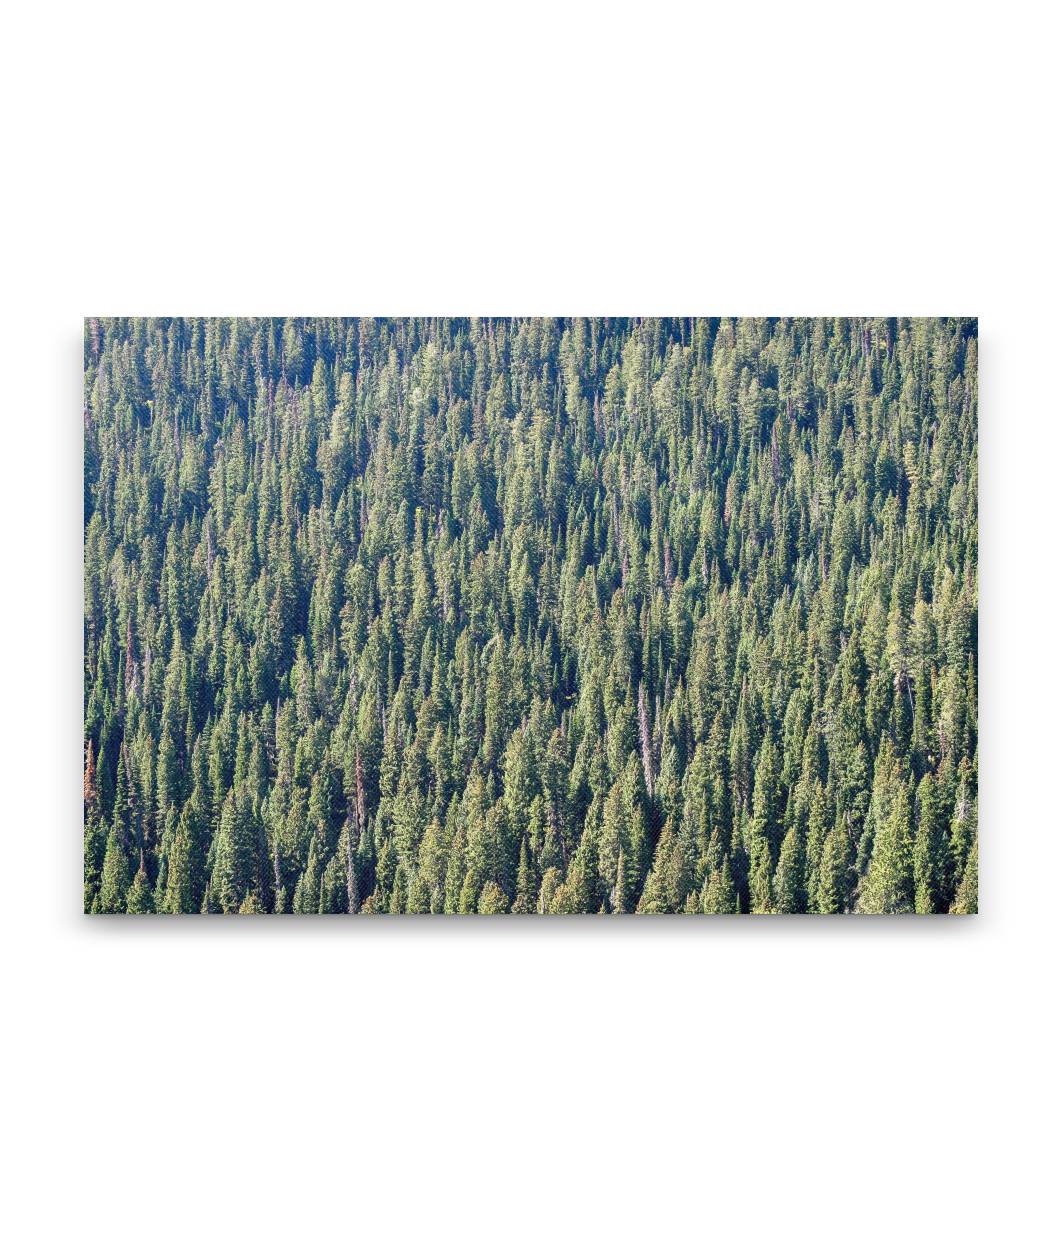 Forest Canopy, Targhee National Forest, Wyoming, USA